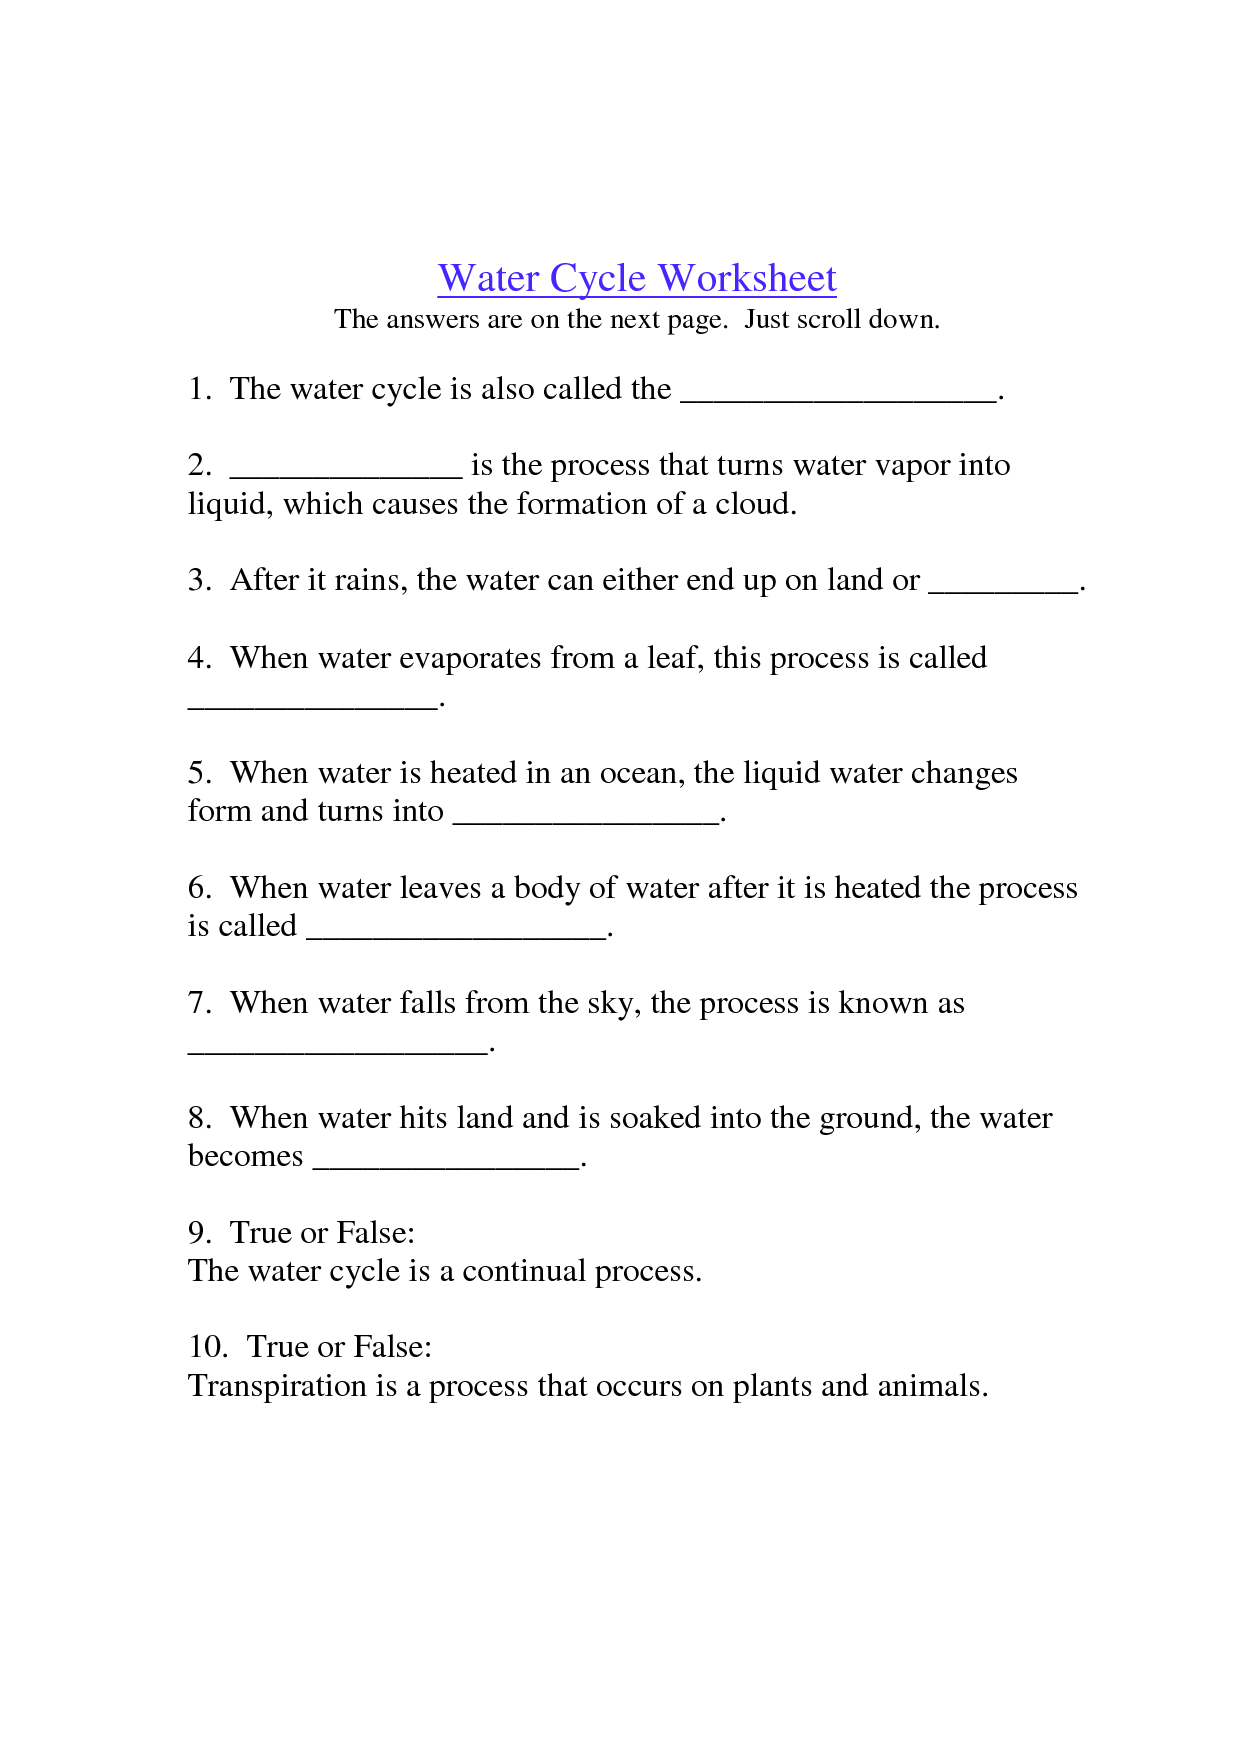 Water Cycle Worksheet Answers Image